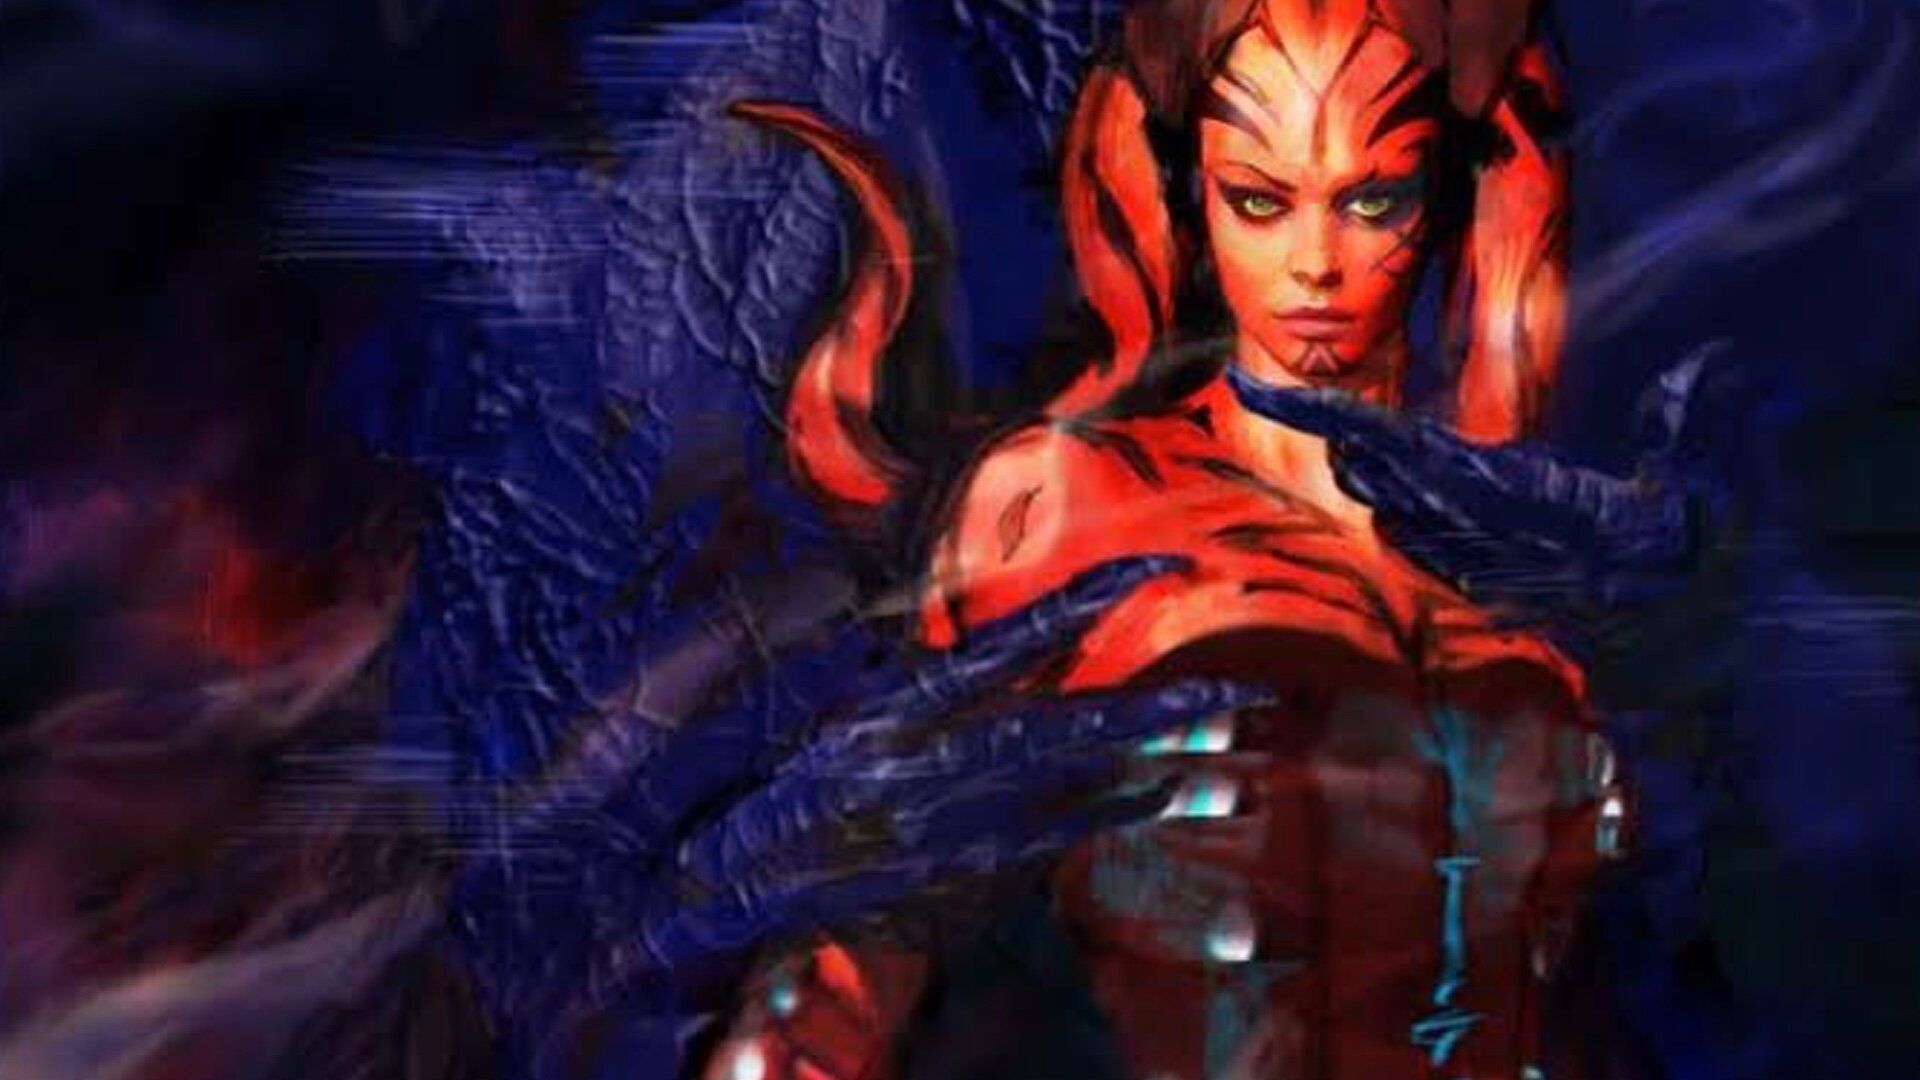 STAR WARS Concept Art Reveals George Lucas's Darth Talon From His Unmade Sequel Trilogy